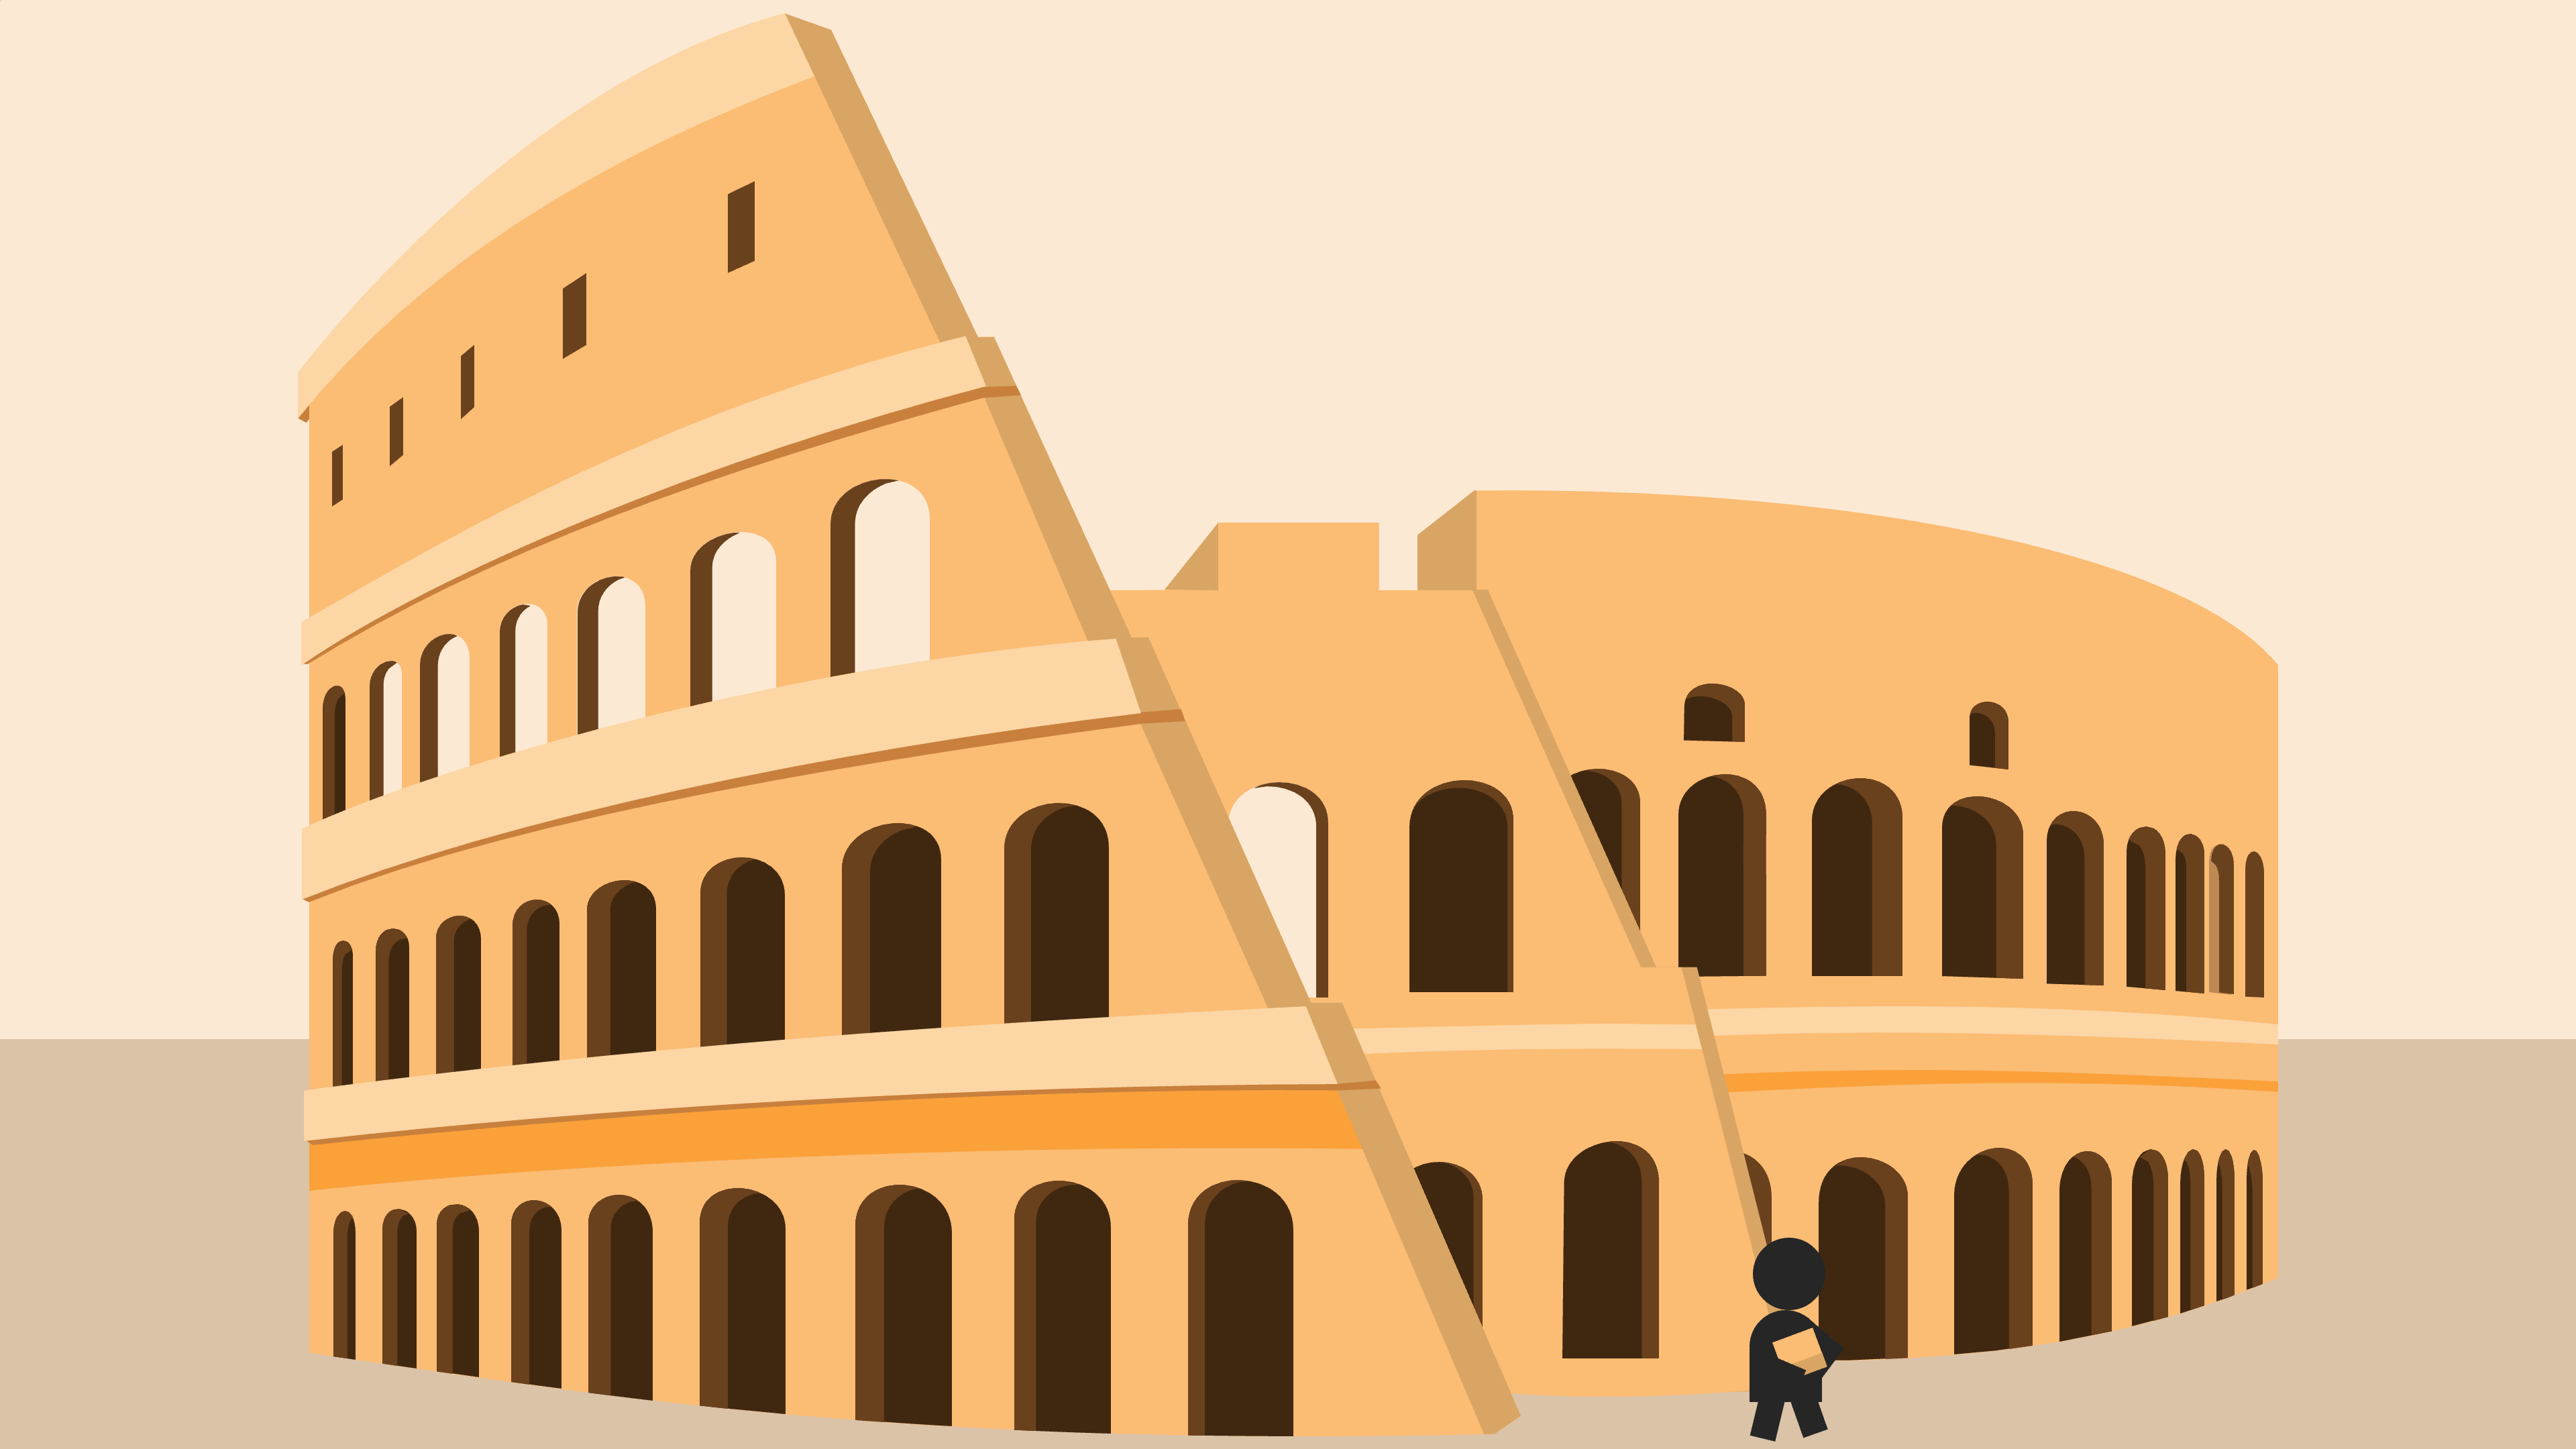 Someone has removed a brick from the Colosseum